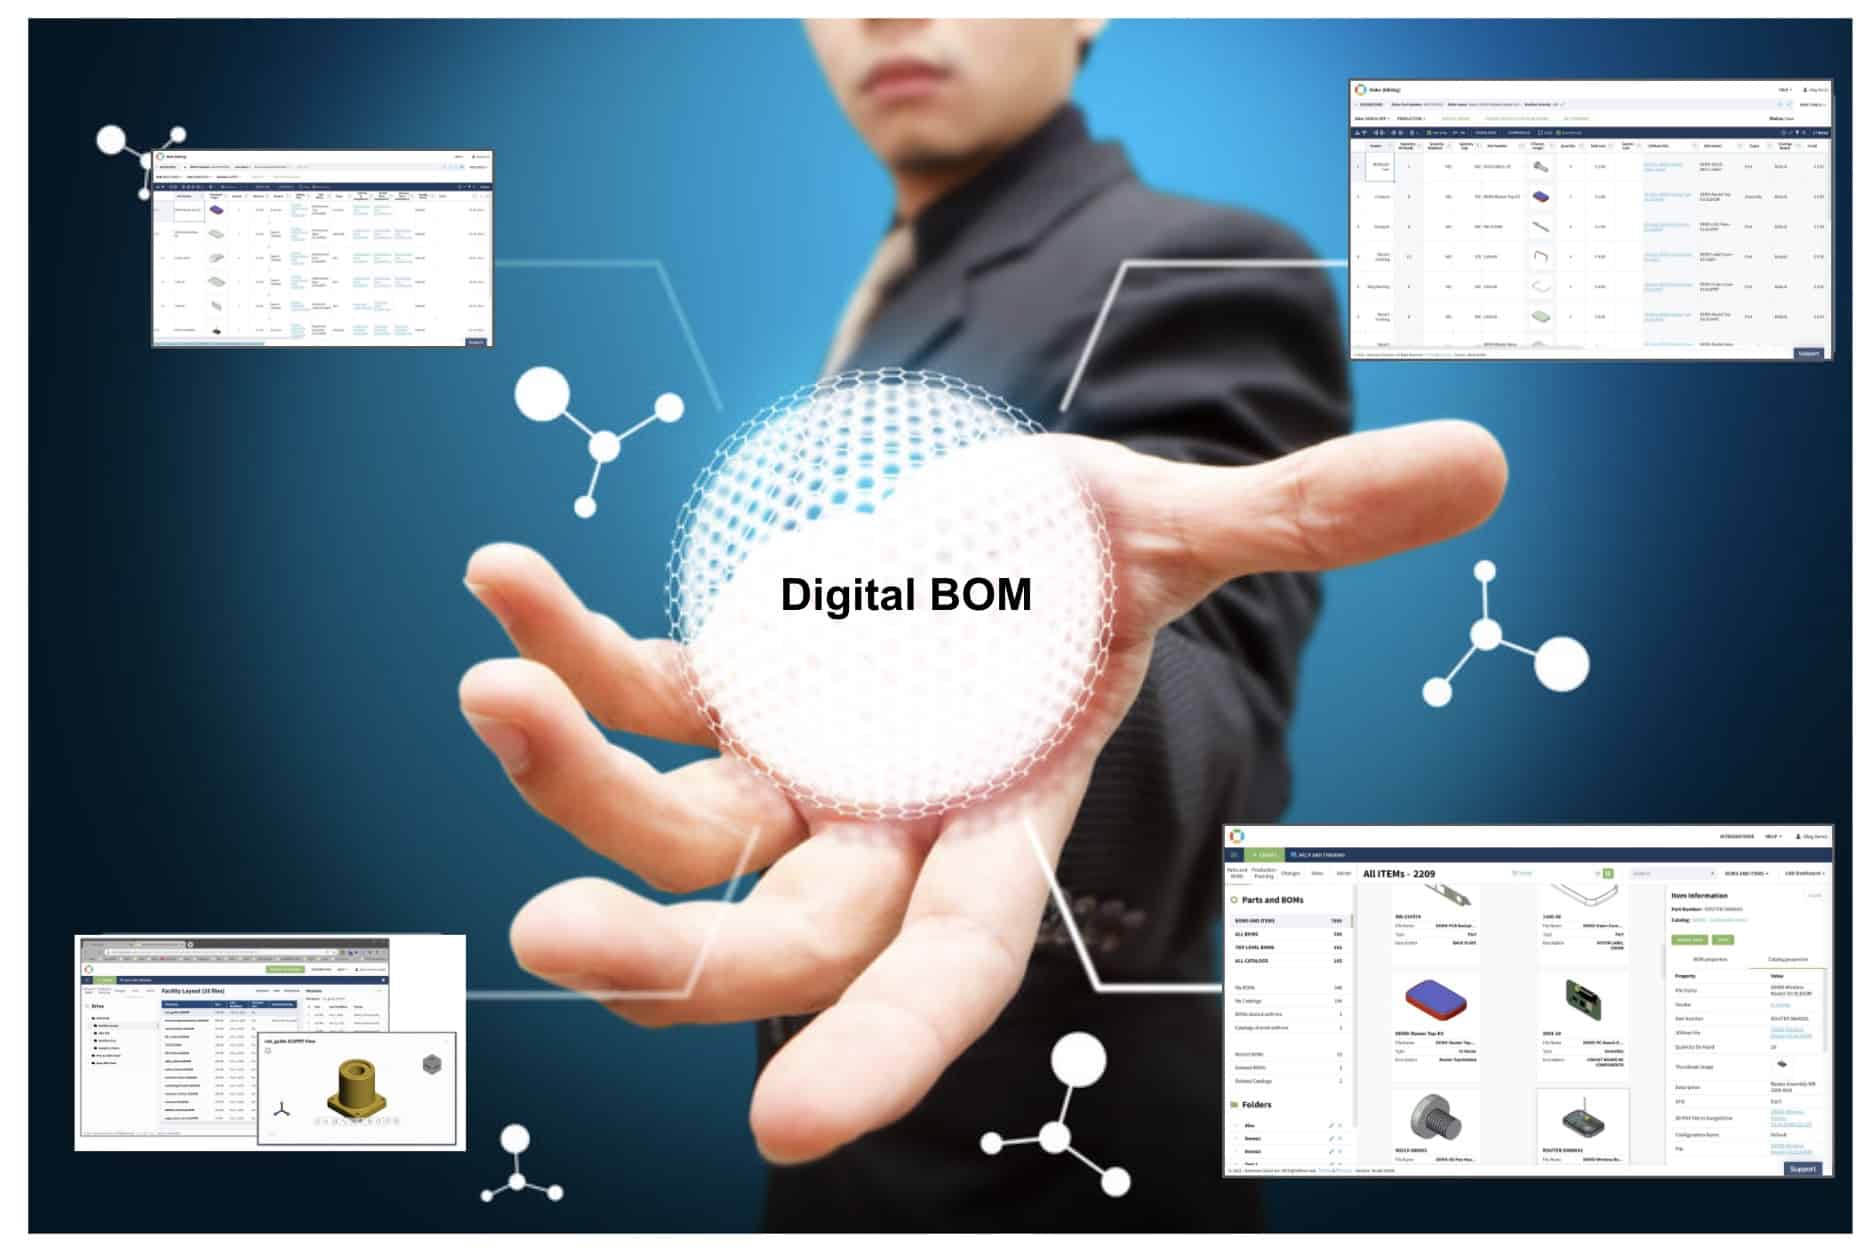 From Spreadsheets To Digital BOM